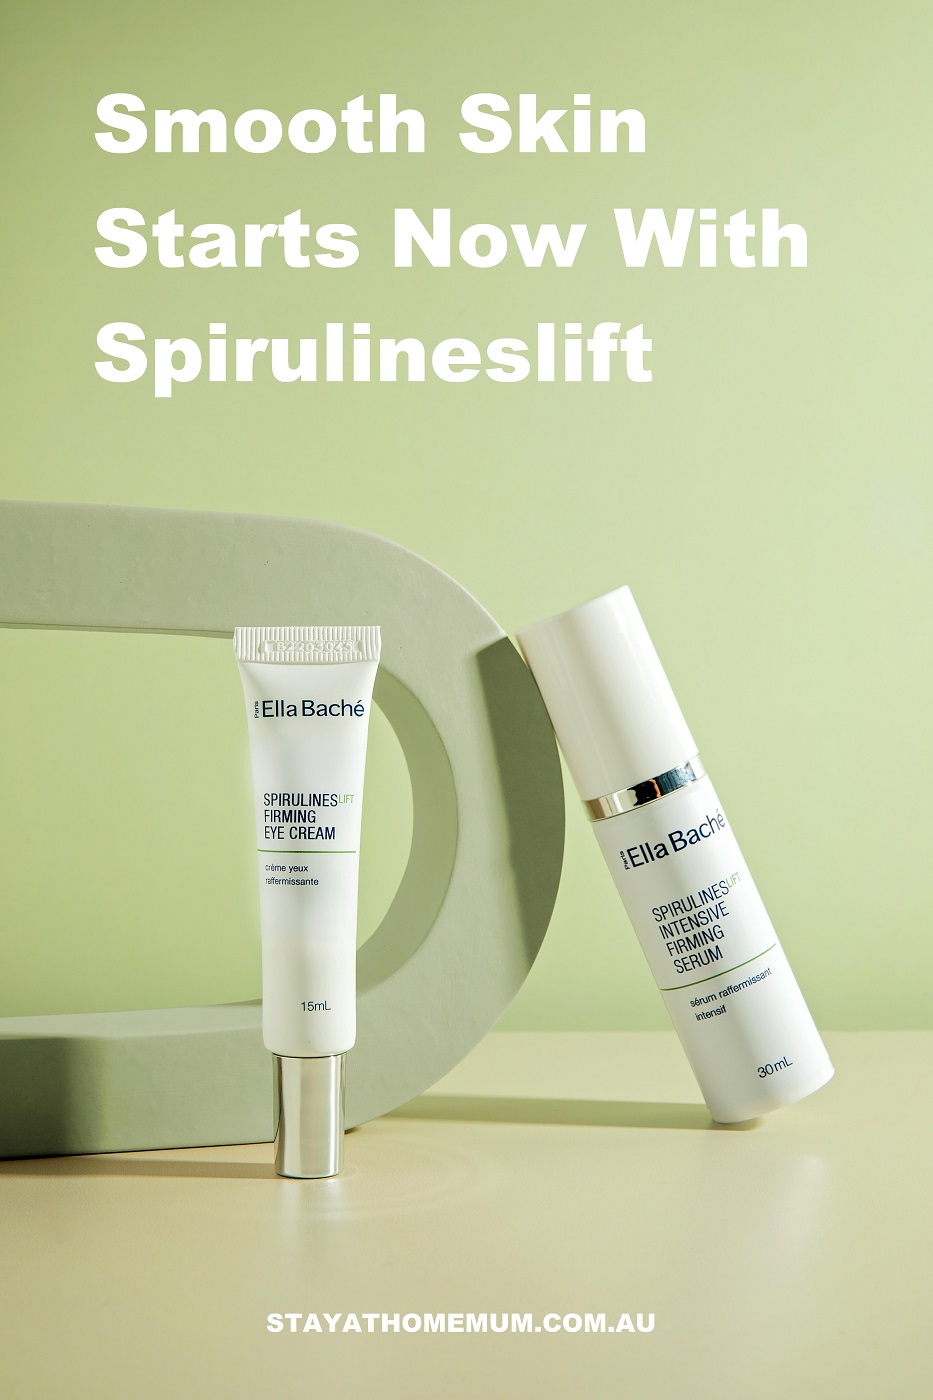 Smooth Skin Starts Now With Spirulineslift I Stay at Home Mum